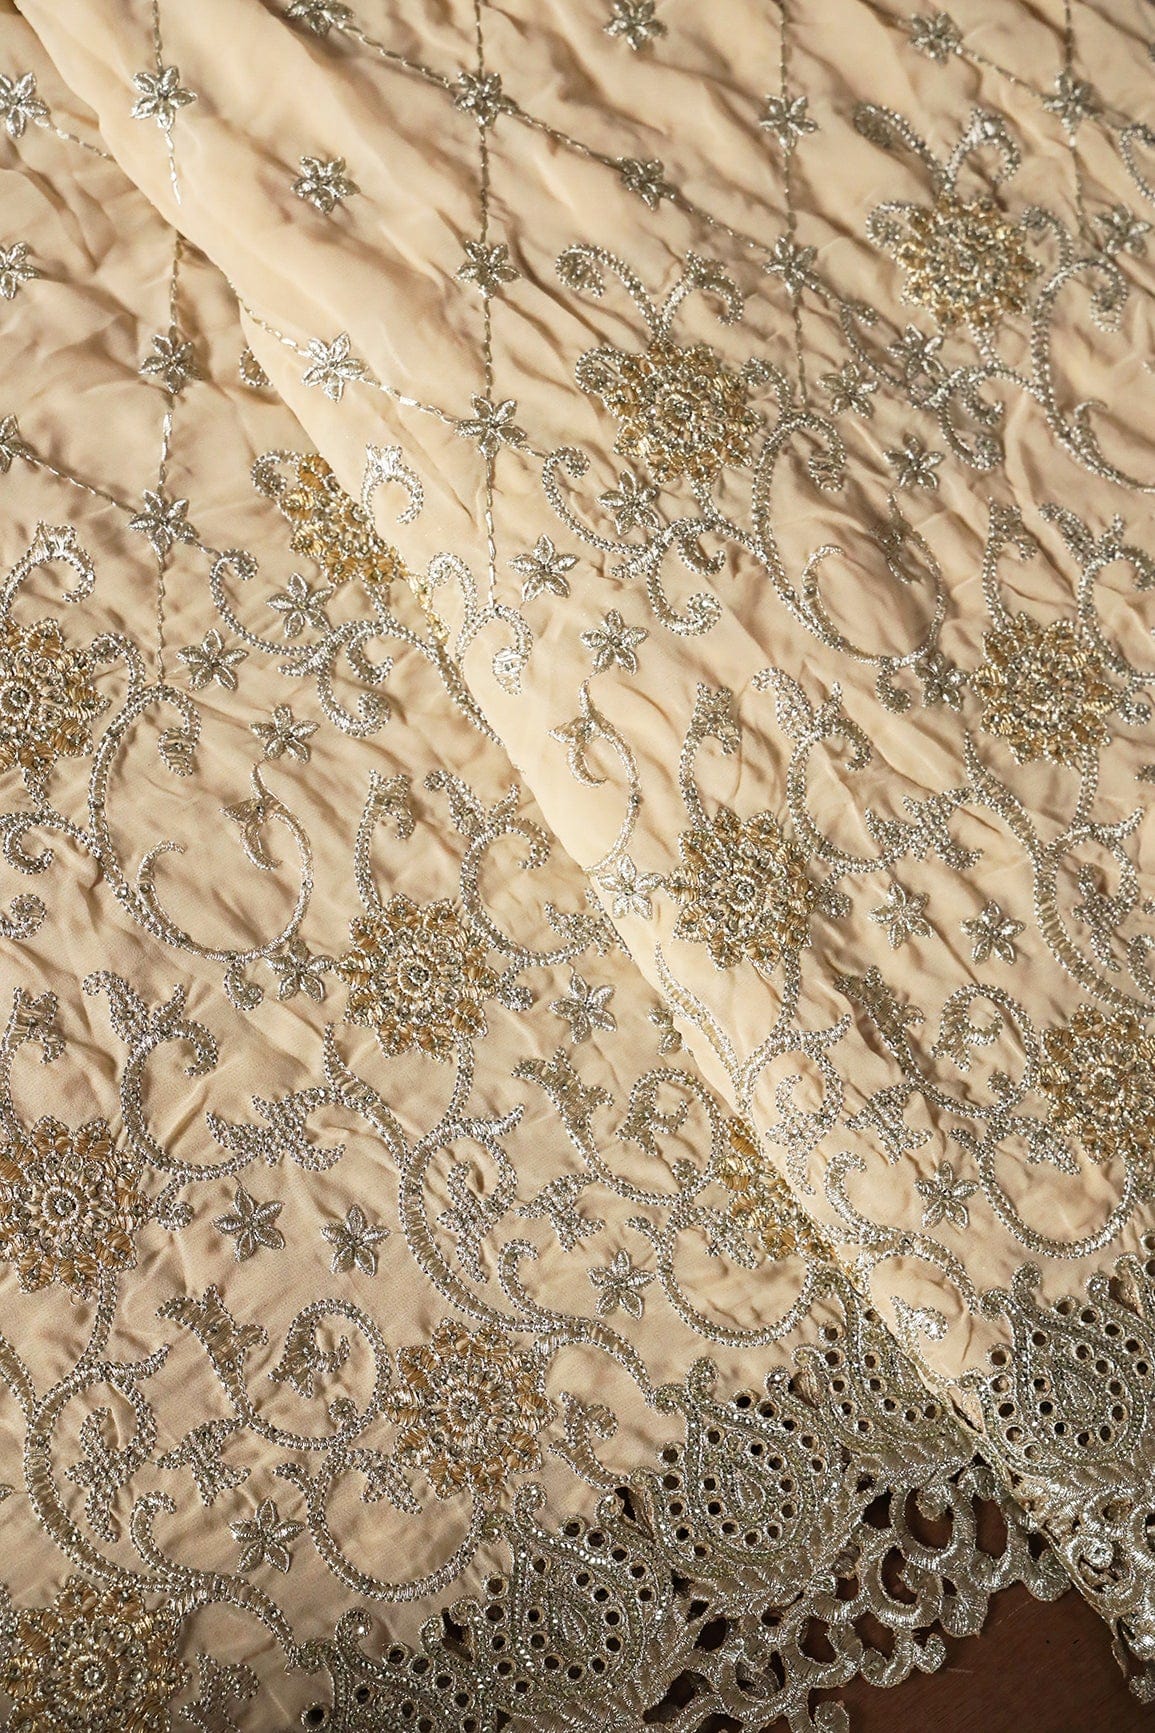 Big Width''56'' Gold And Silver Zari Floral Embroidery Work On Beige Georgette Fabric With Border - doeraa